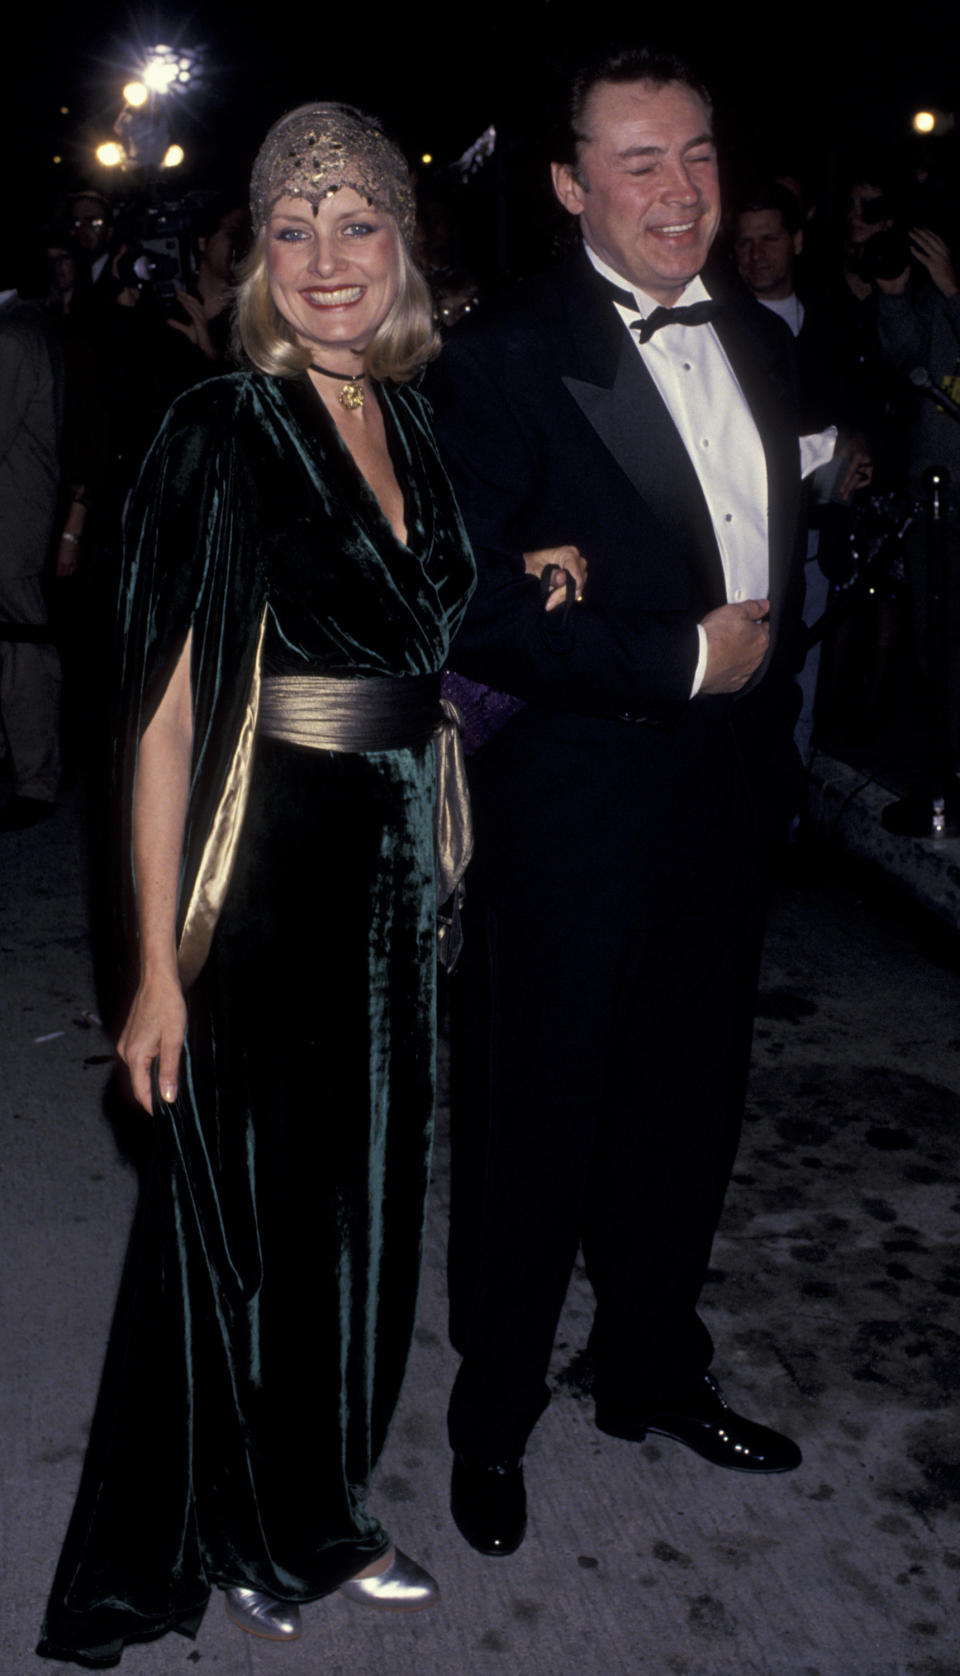 Twiggy and husband Leigh Lawson at the eighth annual American Comedy Awards at the Shrine Auditorium in Los Angeles.